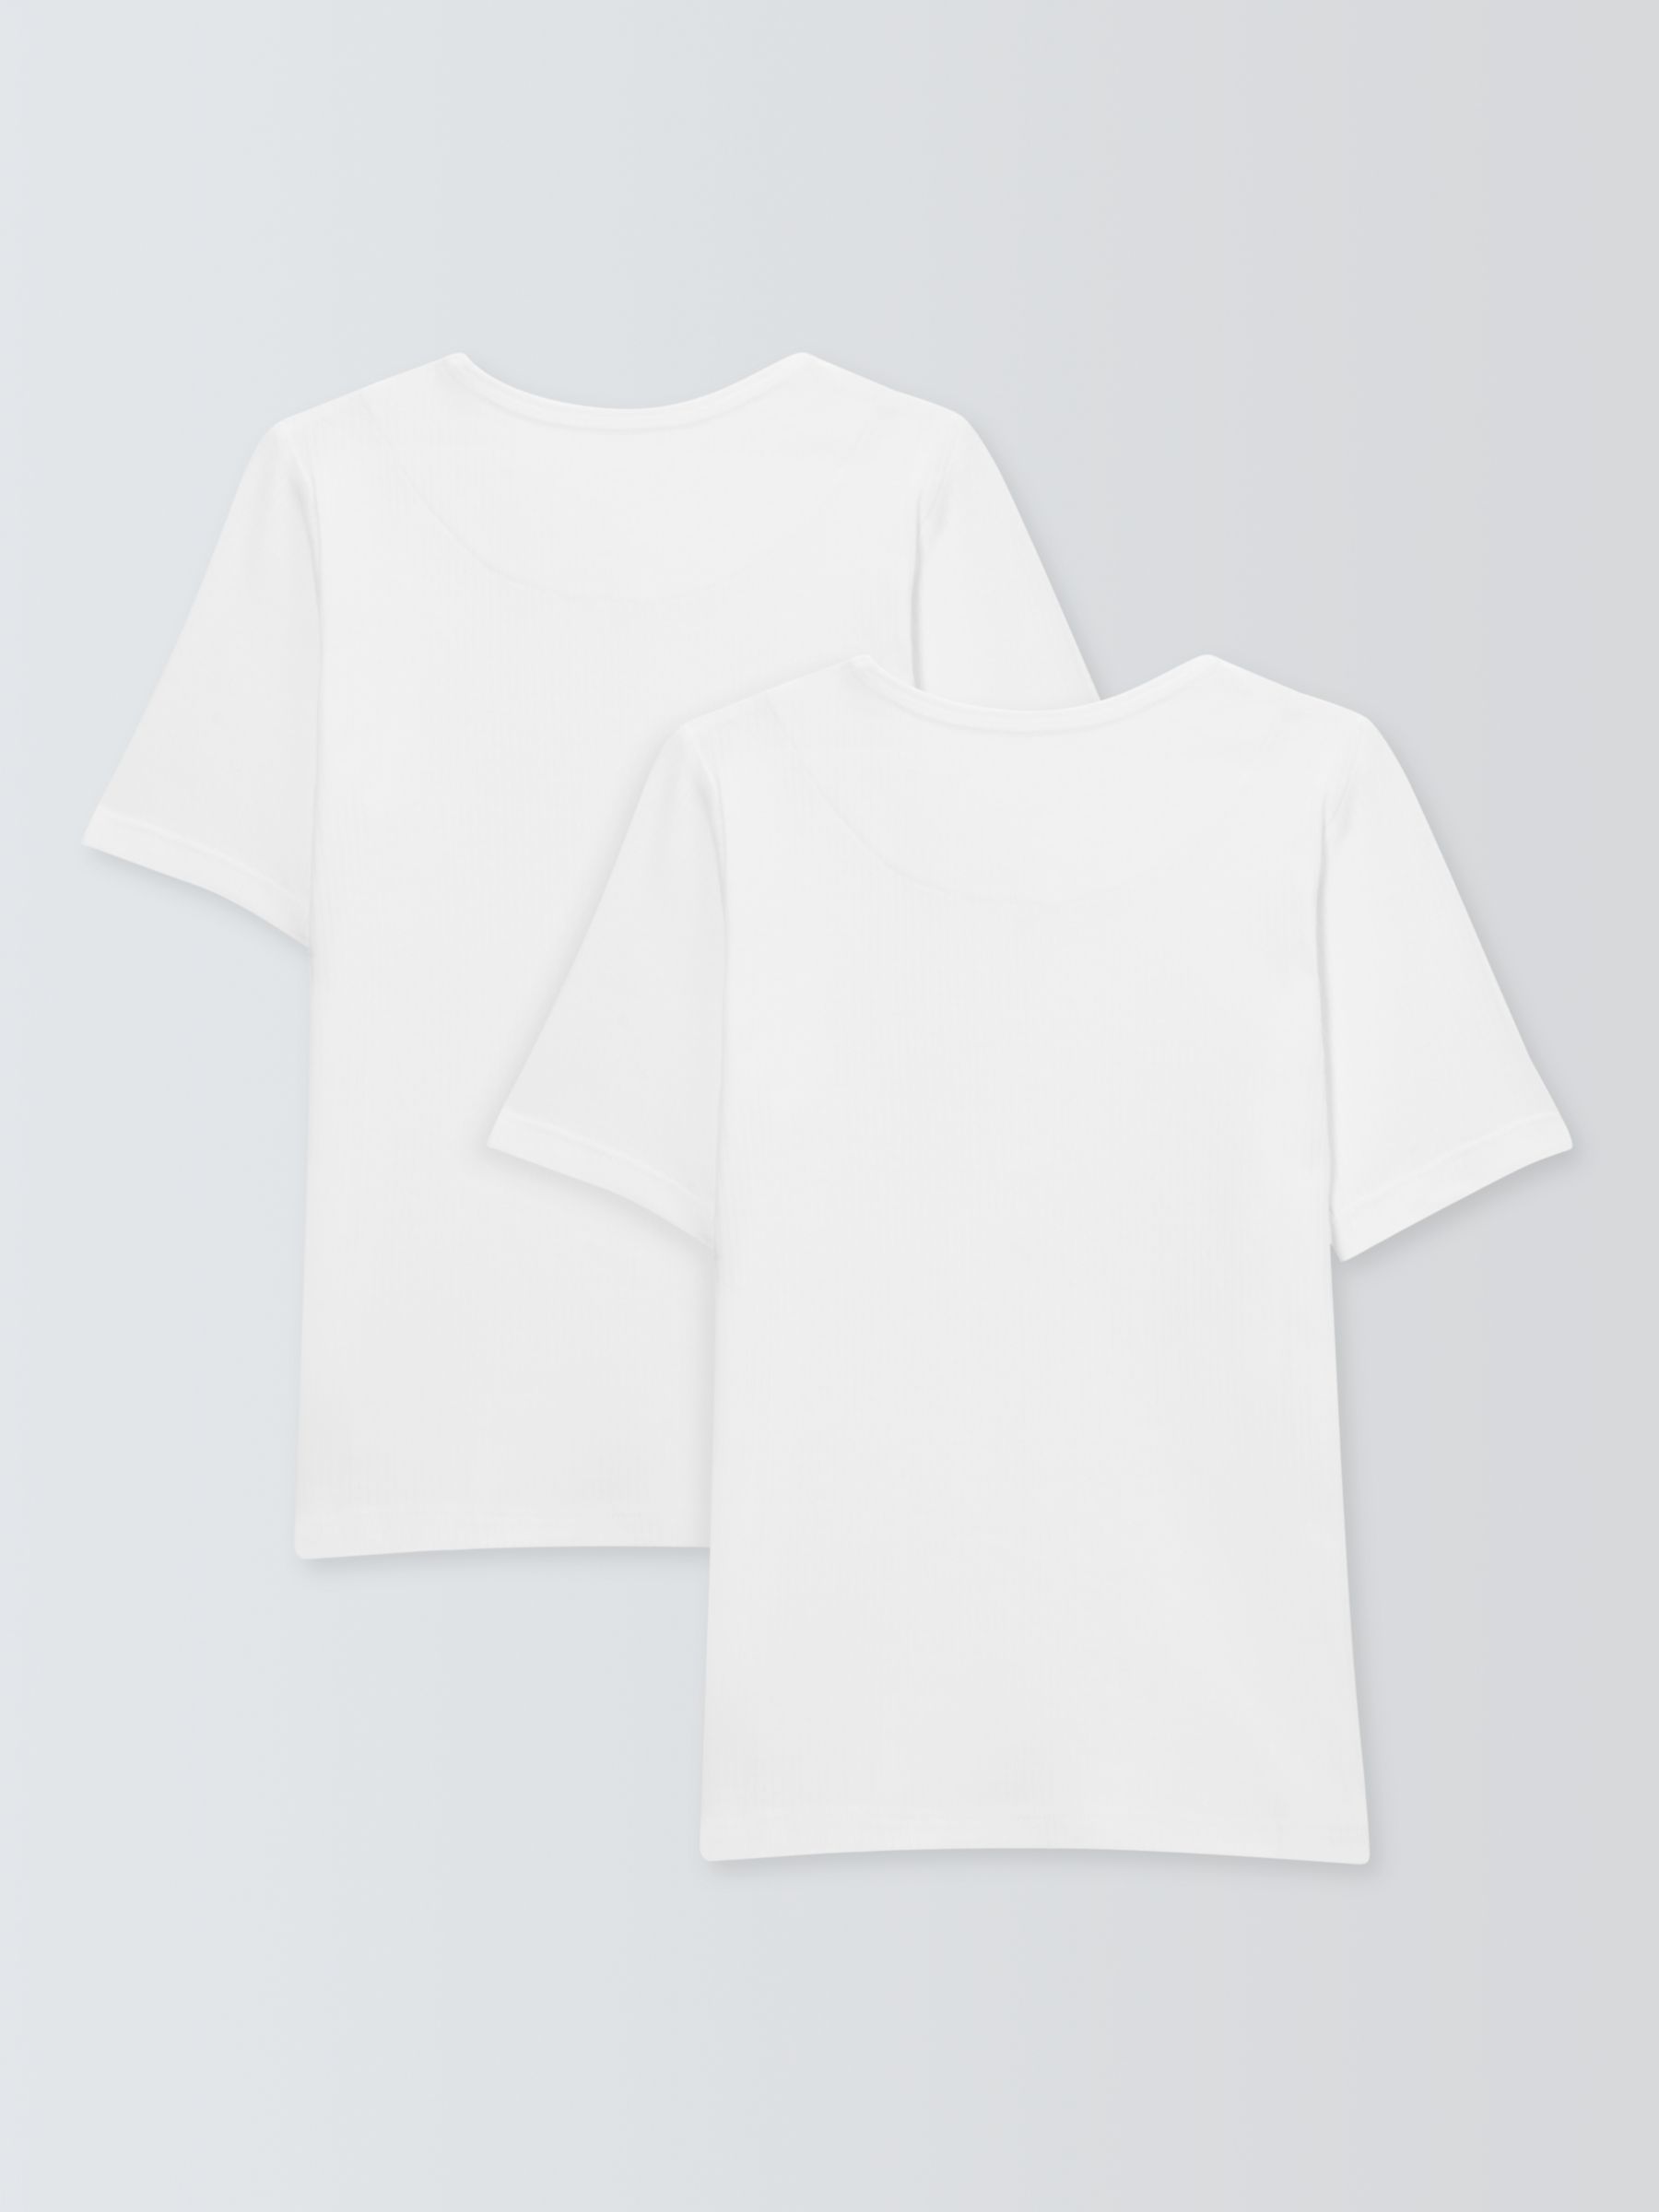 Details about   Boys John Lewis Thermal Long Johns White Sizes 2-3  9-10 10-11 12-13 14-15 Years 